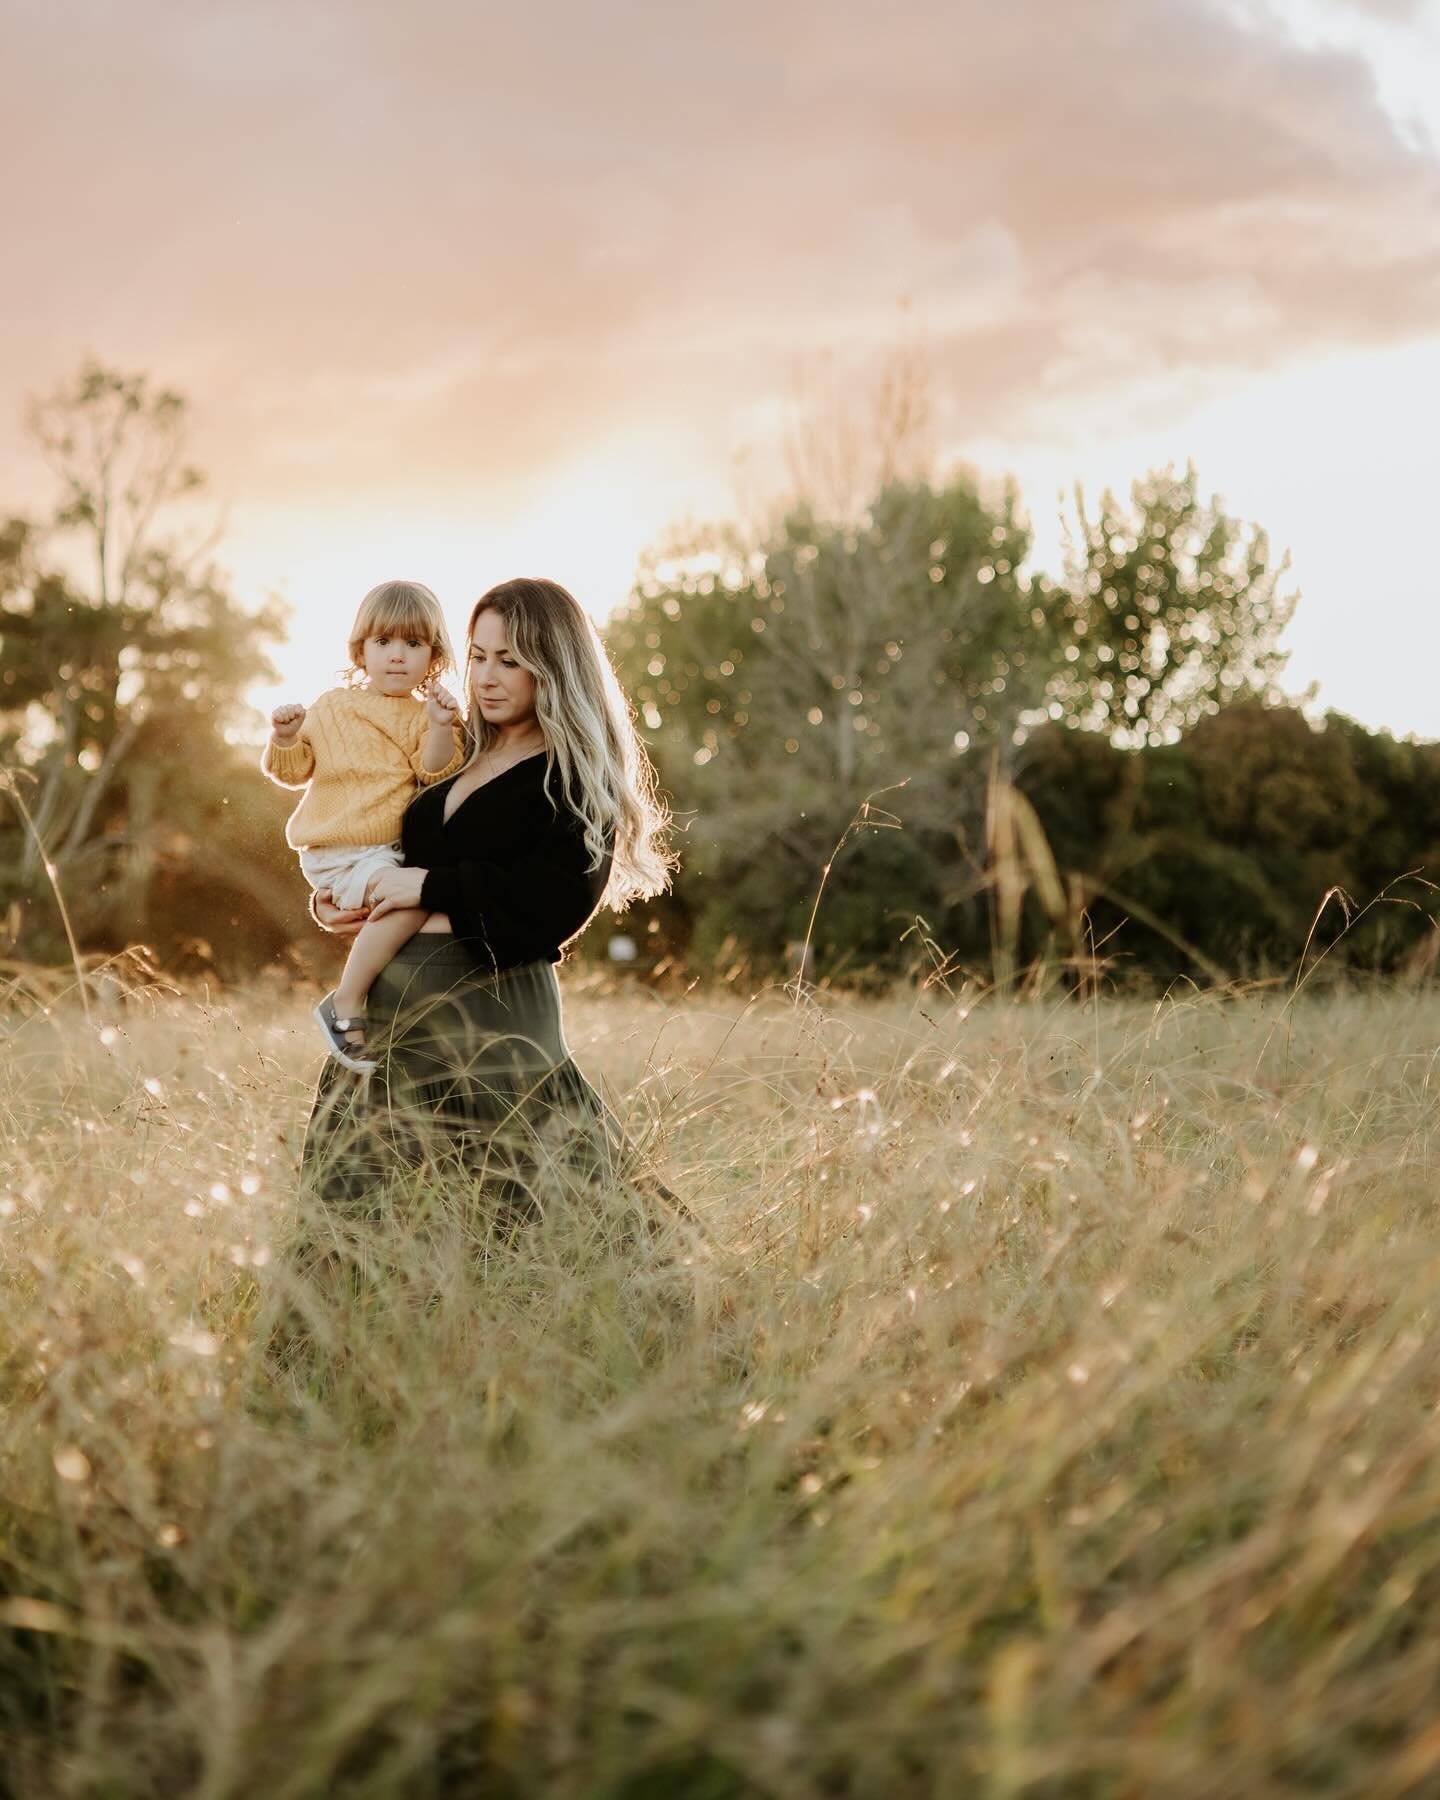 Forever grateful for friends who support your business 🫶🏼

Also, getting to the last of the beautiful long brown grass so if you&rsquo;re wanting a sunset shoot and have young kids, get in touch ASAP 🌾✨